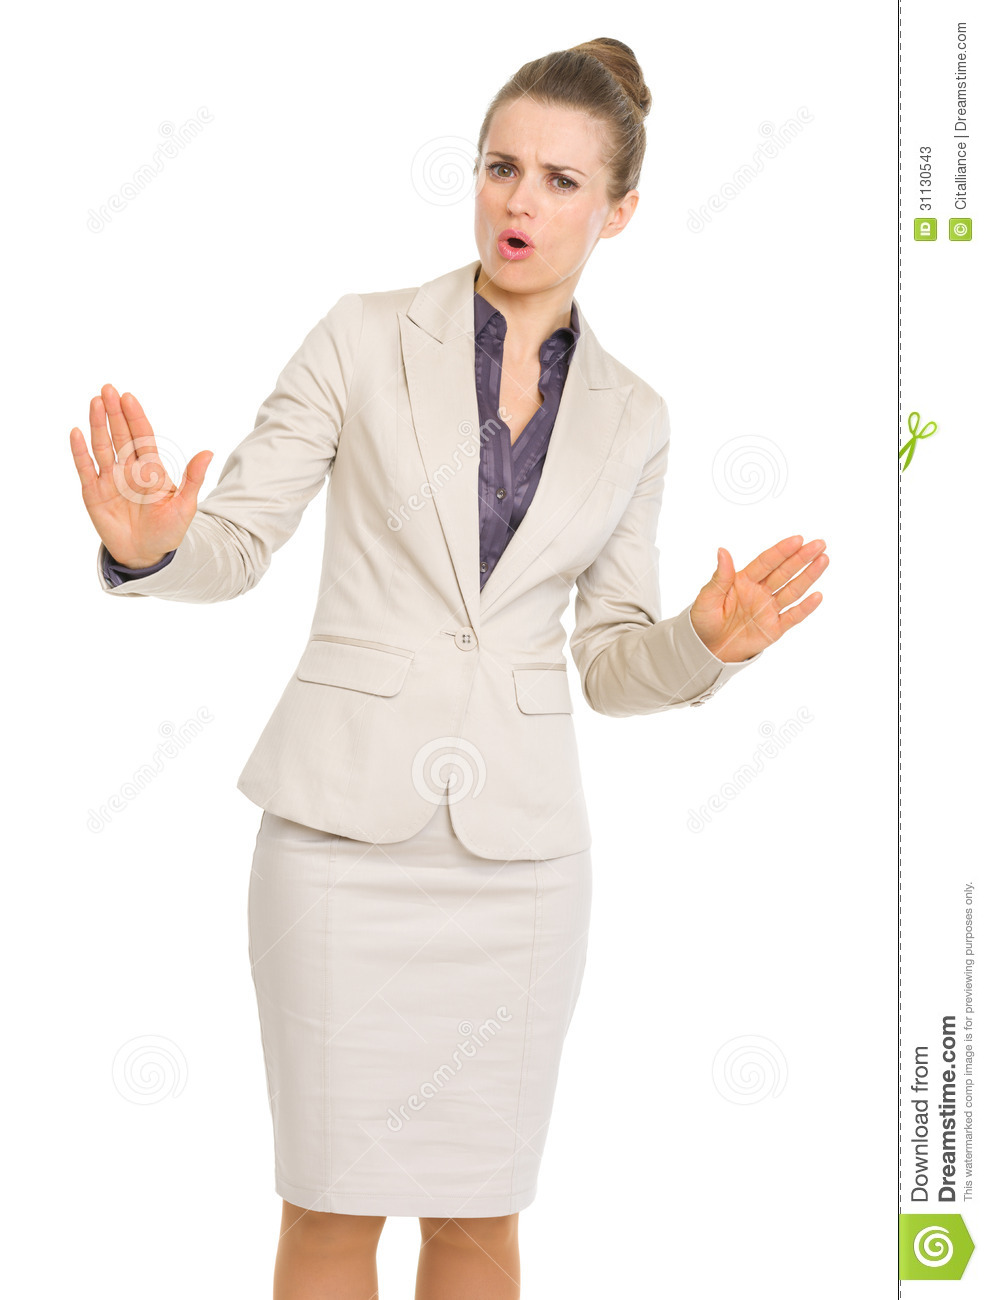 Business Woman Showing Calm Down Gesture Stock Photos   Image